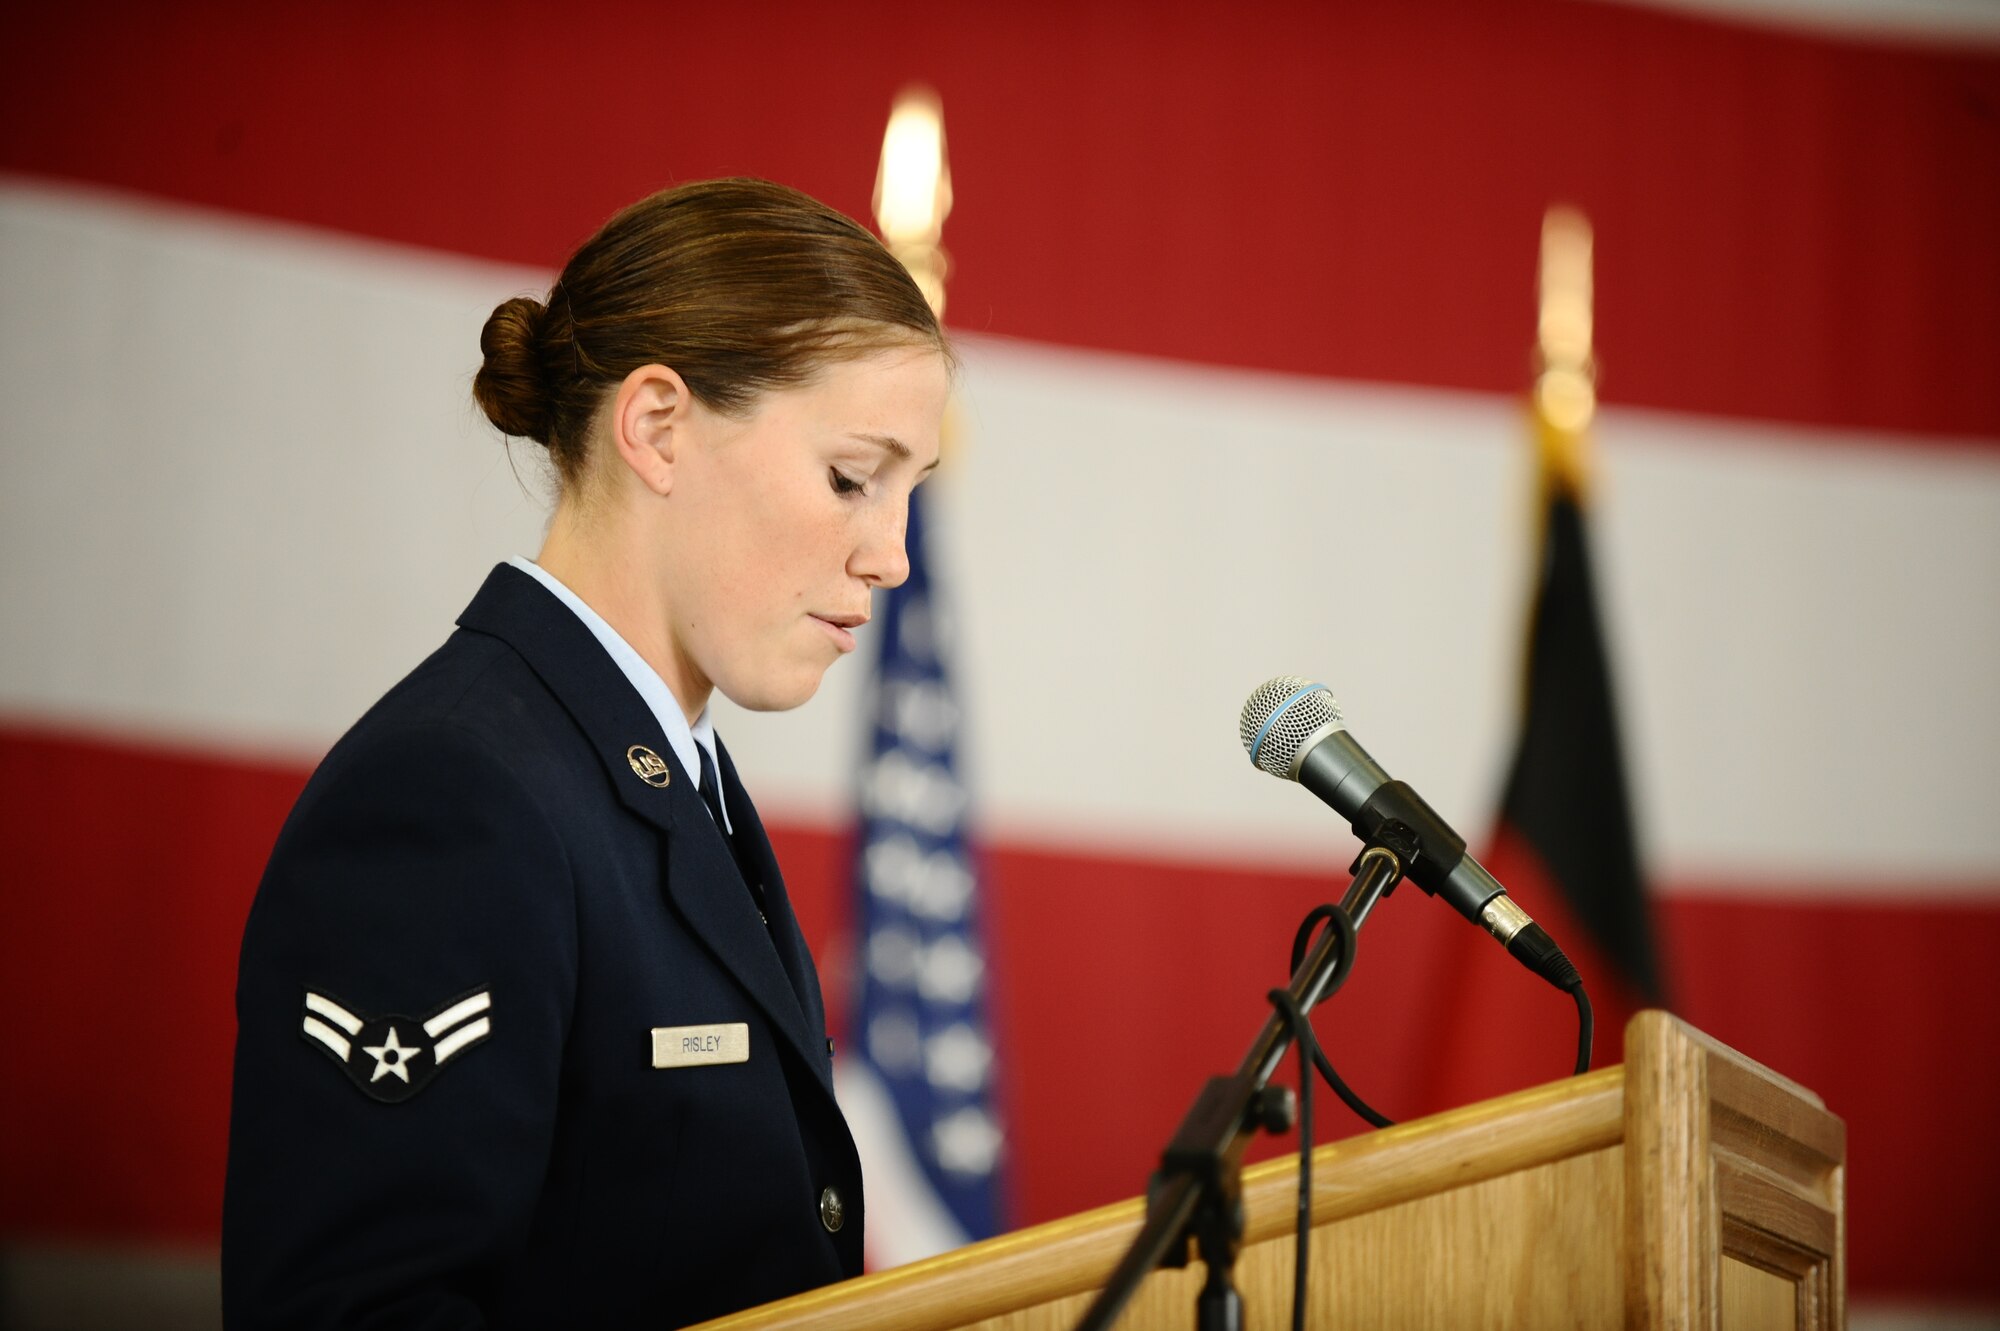 SPANGDAHLEM AIR BASE, Germany – Airman 1st Class Jacqueline Risley, 52nd Civil Engineer Squadron Explosive Ordnance Disposal Flight, recites the Explosive Ordnance Disposal Prayer during the memorial service for Staff Sgt. Joseph J. Hamski, 52nd CES EOD Flight, held here June 16. Sergeant Hamski was killed in action May 26, 2011, in Shorabak, Afghanistan, while responding to a known enemy weapons cache. (U.S. Air Force photo/Senior Airman Nathanael Callon)